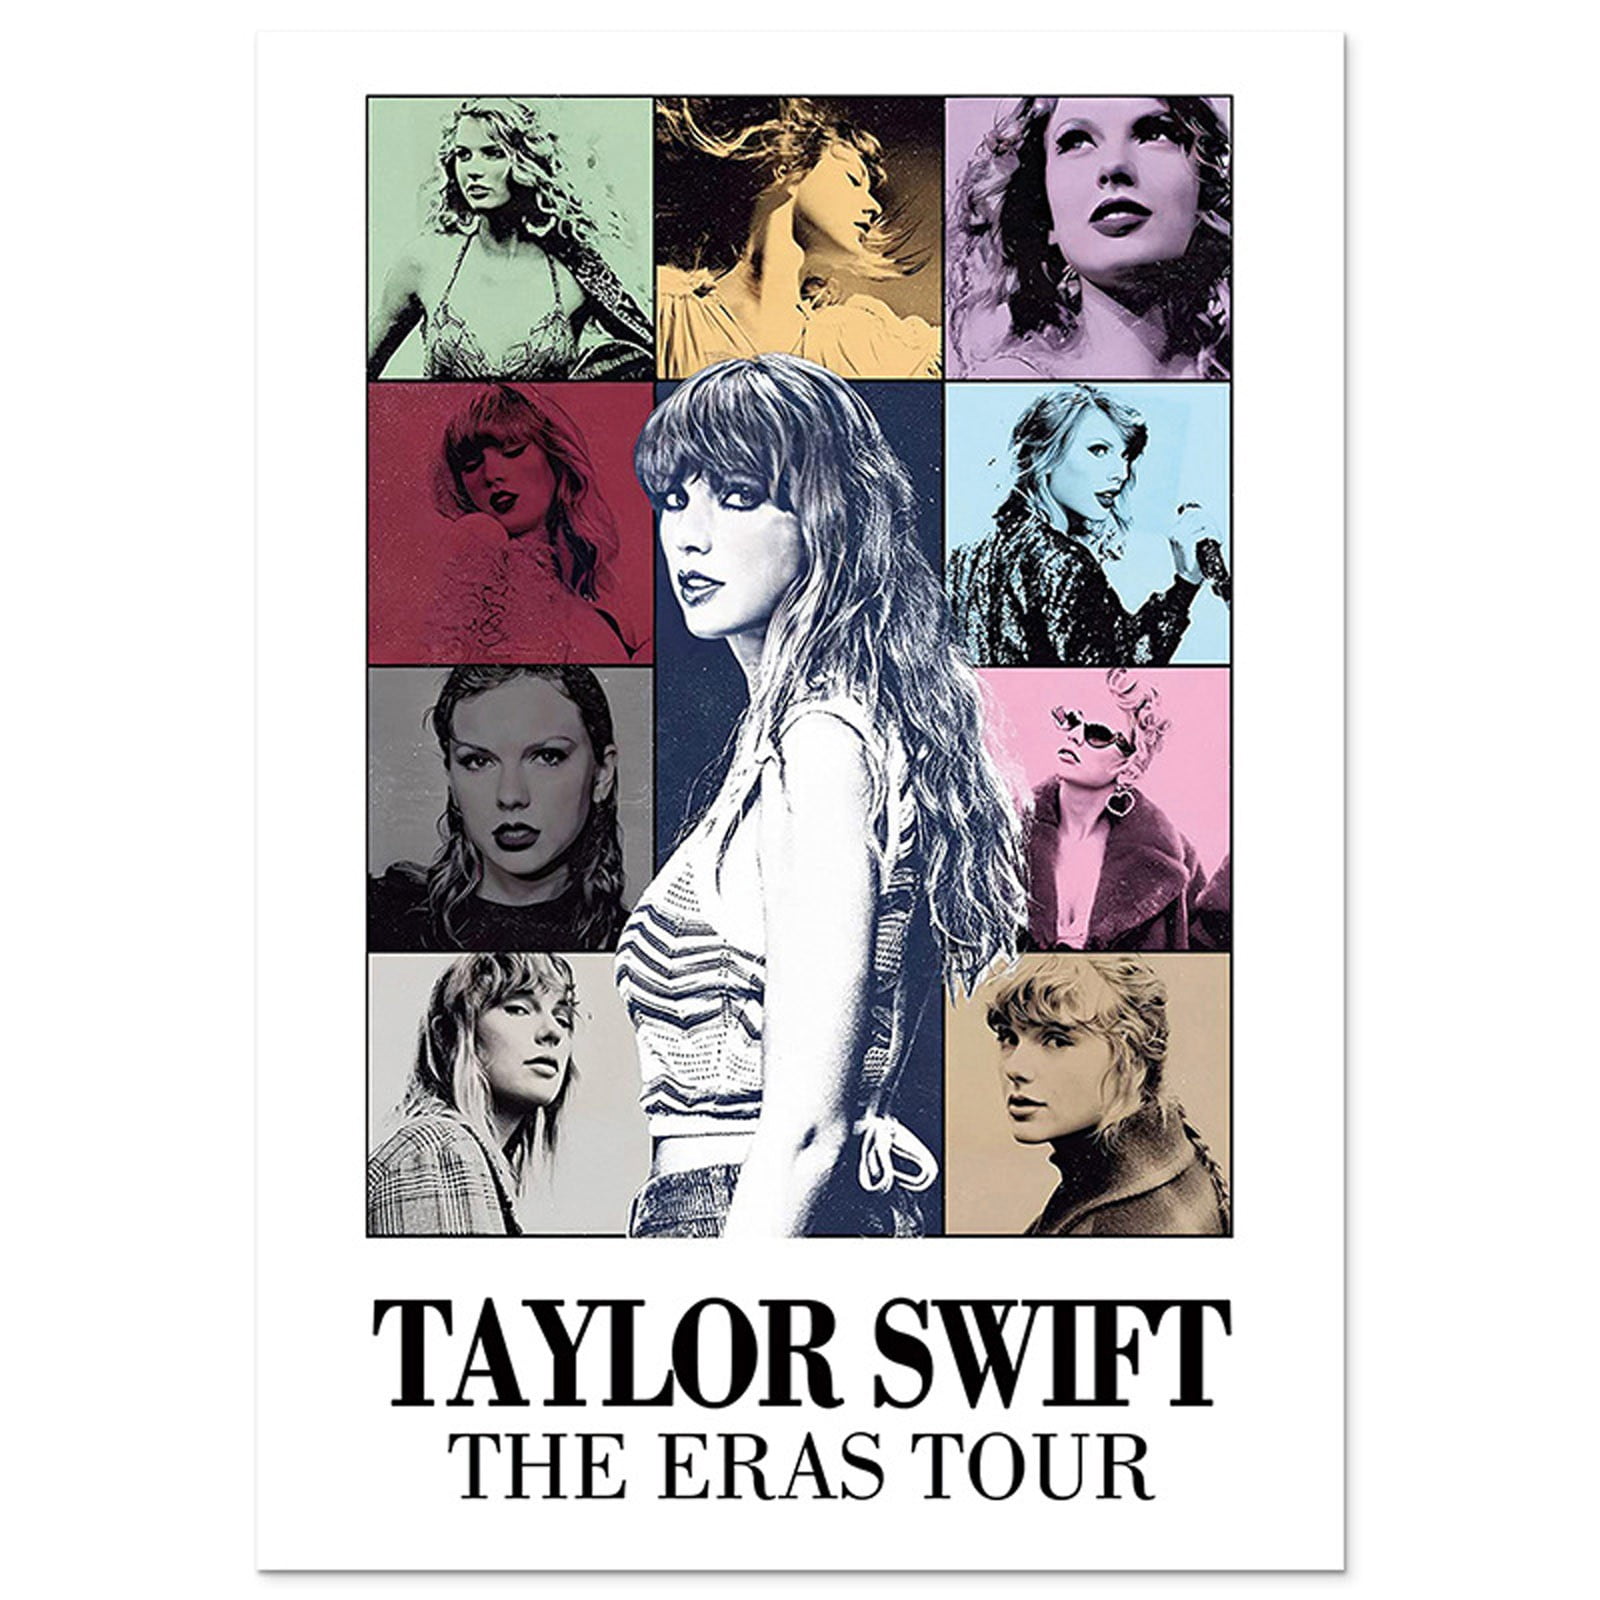 Taylor-Swifts Merch  Taylors Poster Wall Art Music Cover Album Posters  Songs for Wall Room Decor Painting Paper HD Print Bedroom Livingroom  Decorations 19.5x27.3,TS Fans Gifts 